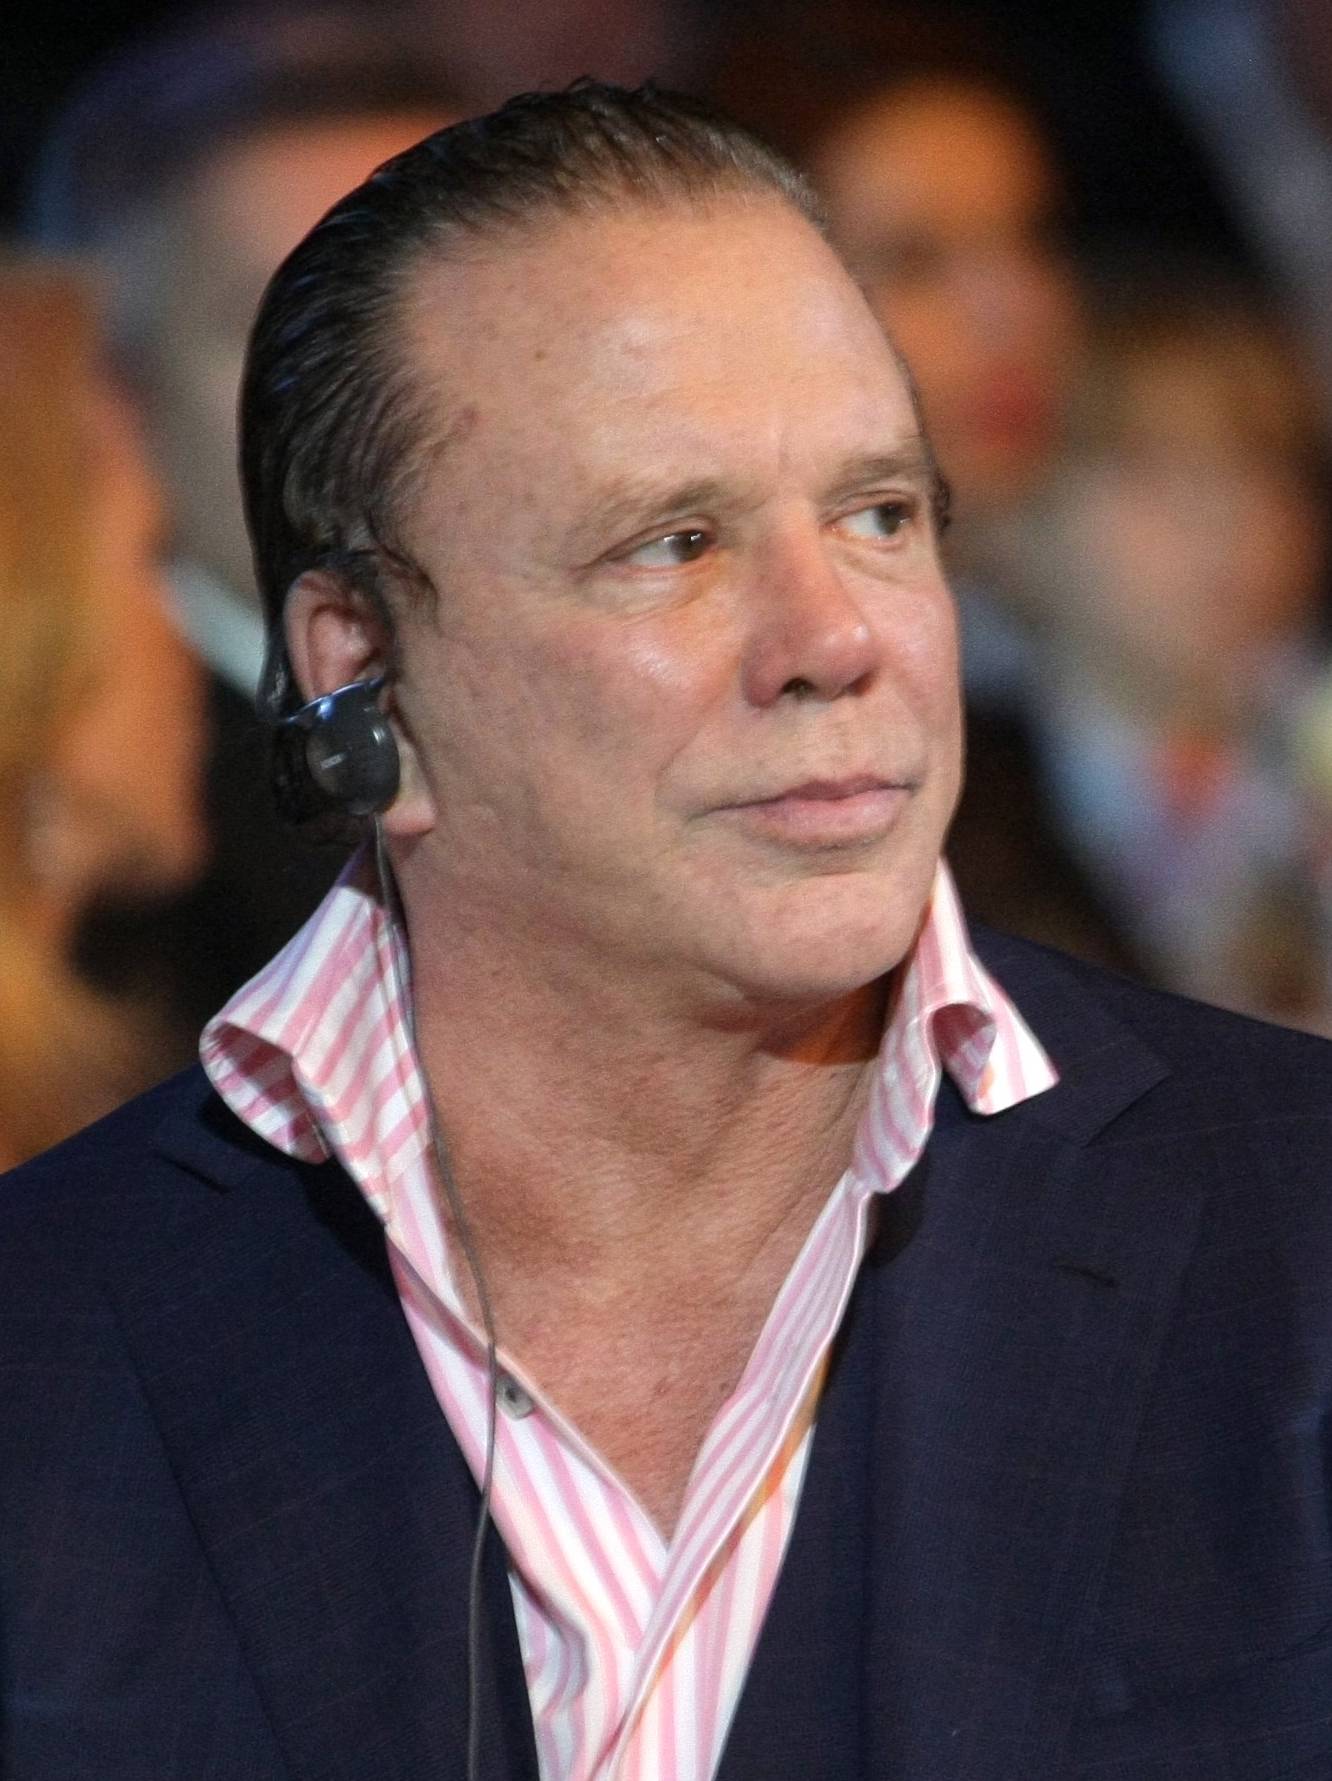 Who is Actor Mickey Rourke? His Net Worth, Age, Family, Wife, Bio